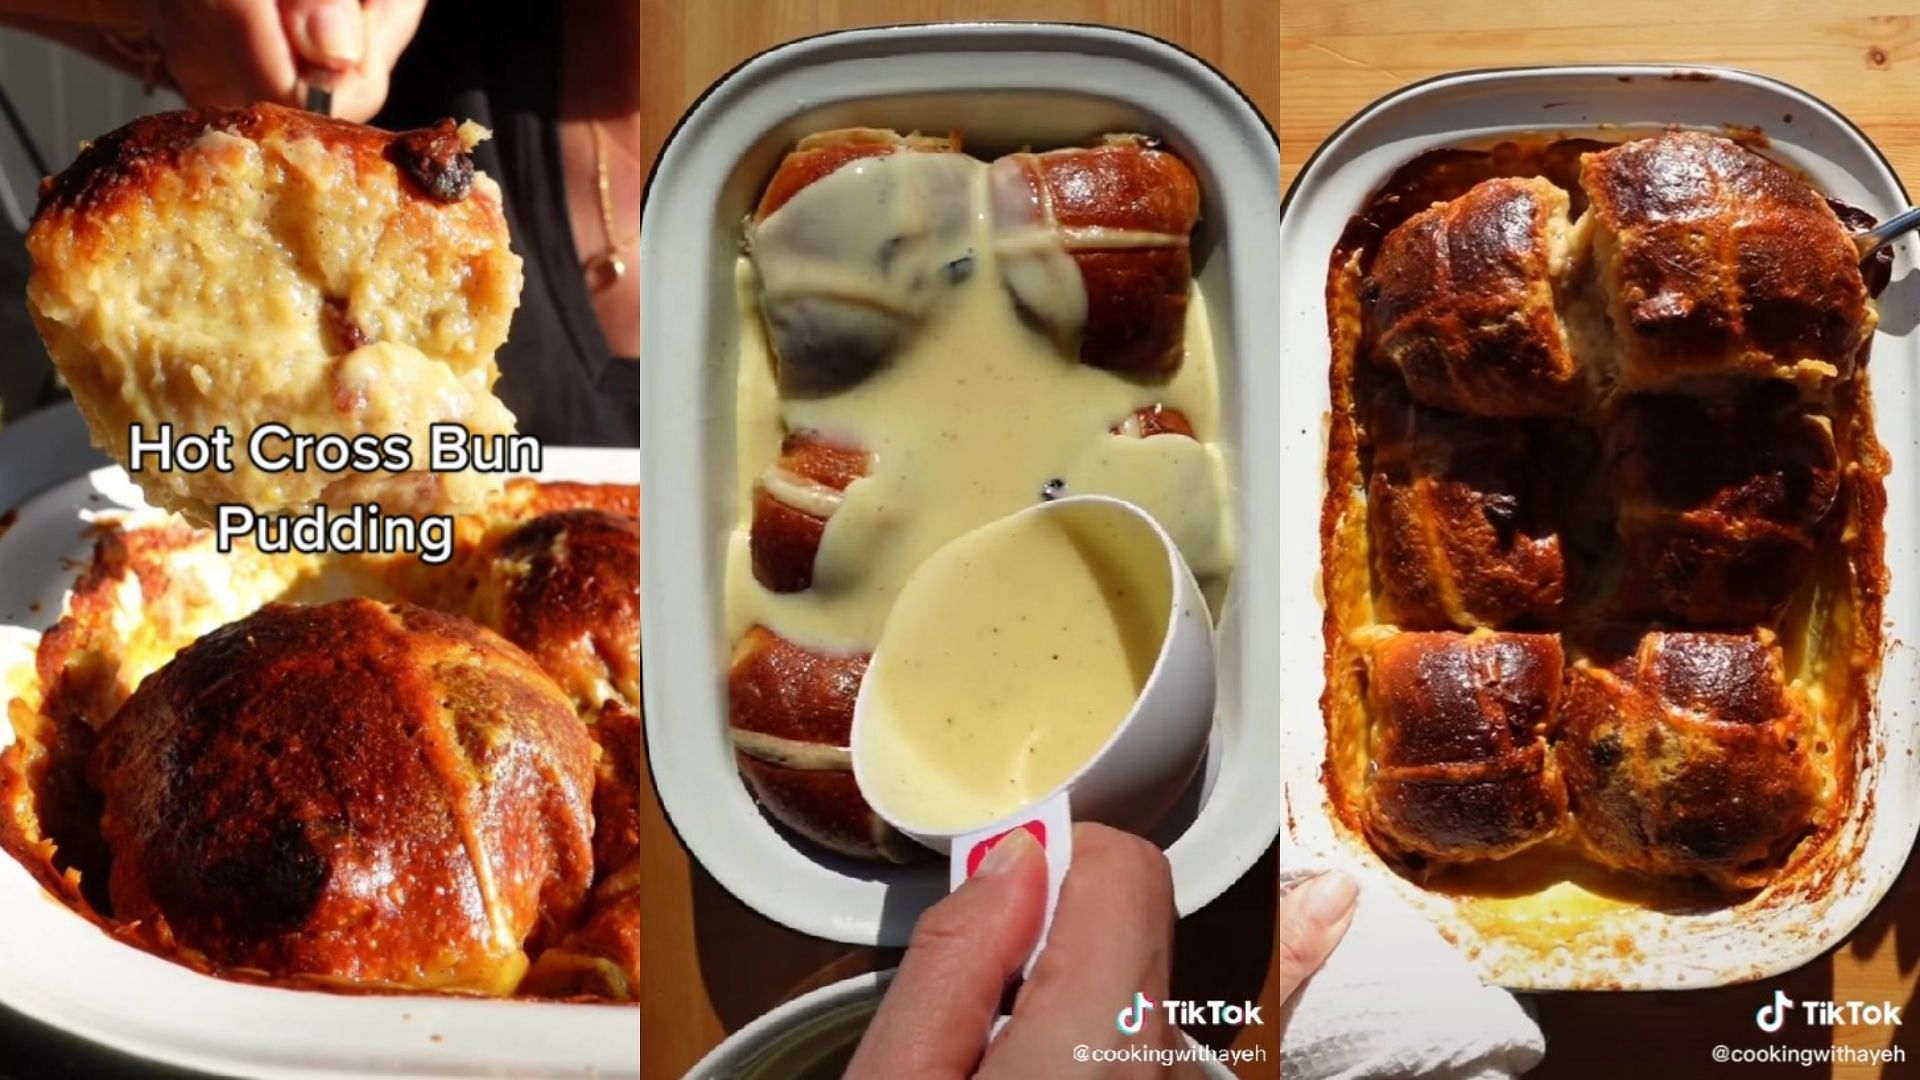 Cooking with Ayeh&#039;s Easter leftovers recipe for hot cross bun pudding has gone viral on TikTok (Images via cookingwithayeh/TikTok)